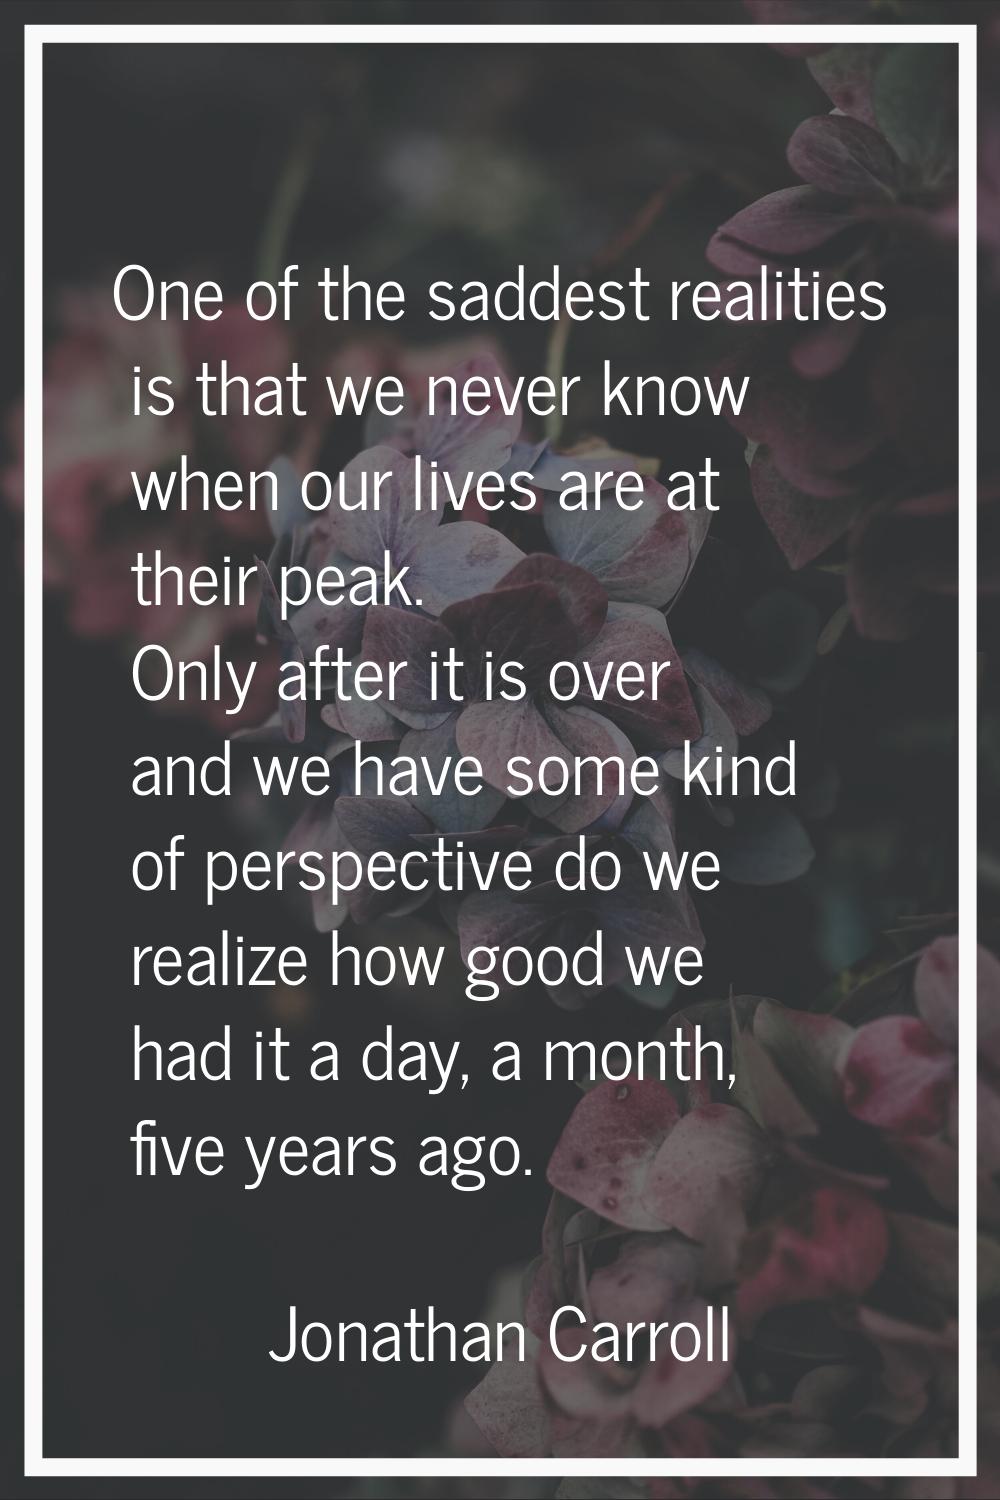 One of the saddest realities is that we never know when our lives are at their peak. Only after it 